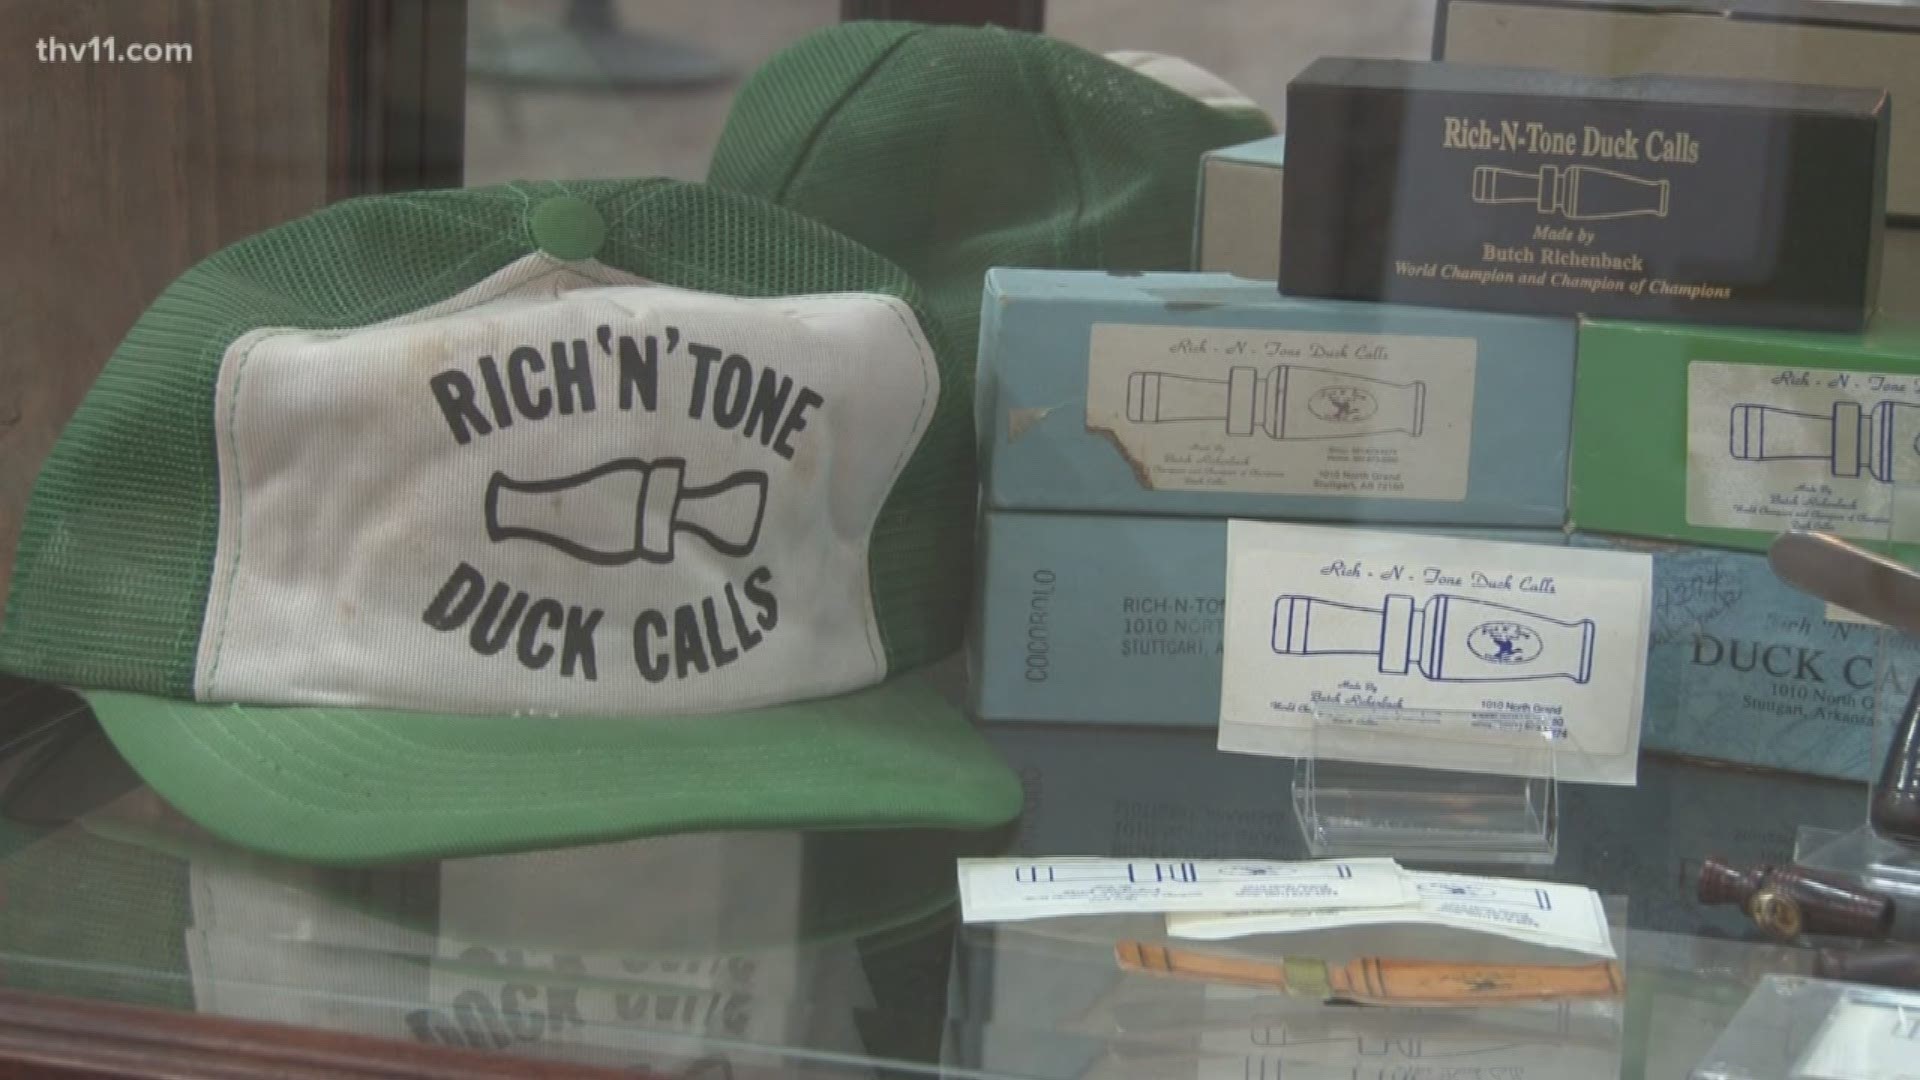 A popular duck call shop in Stuttgart has reopened after it burned down three years ago.